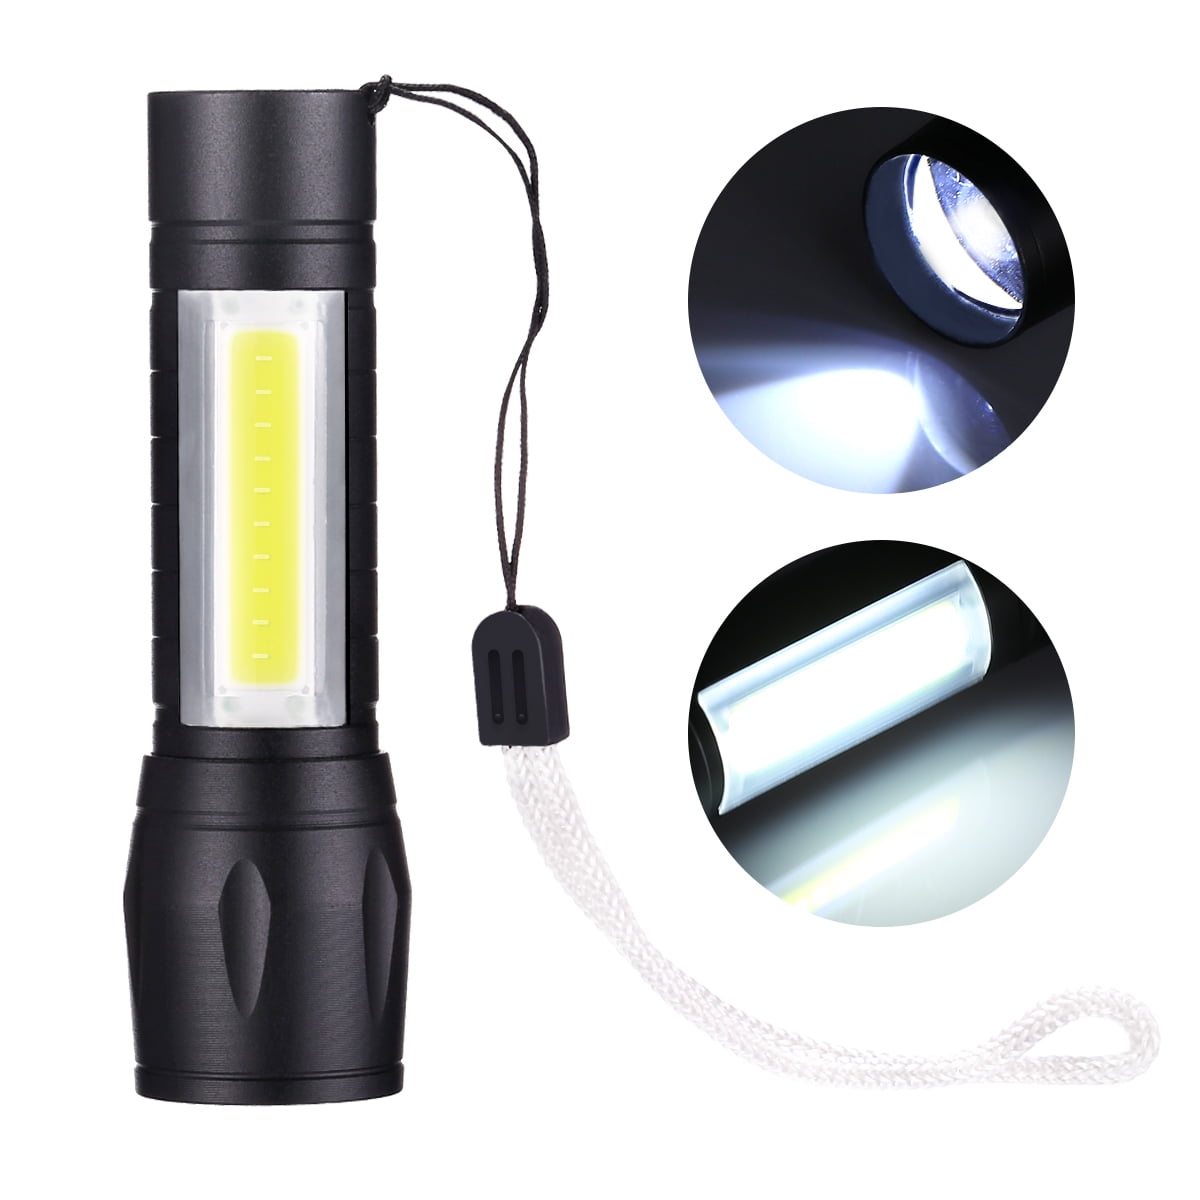 Rechargeable 2 Modes Mini LED Flashlight Lamp USB Torch Light With Keychain New 